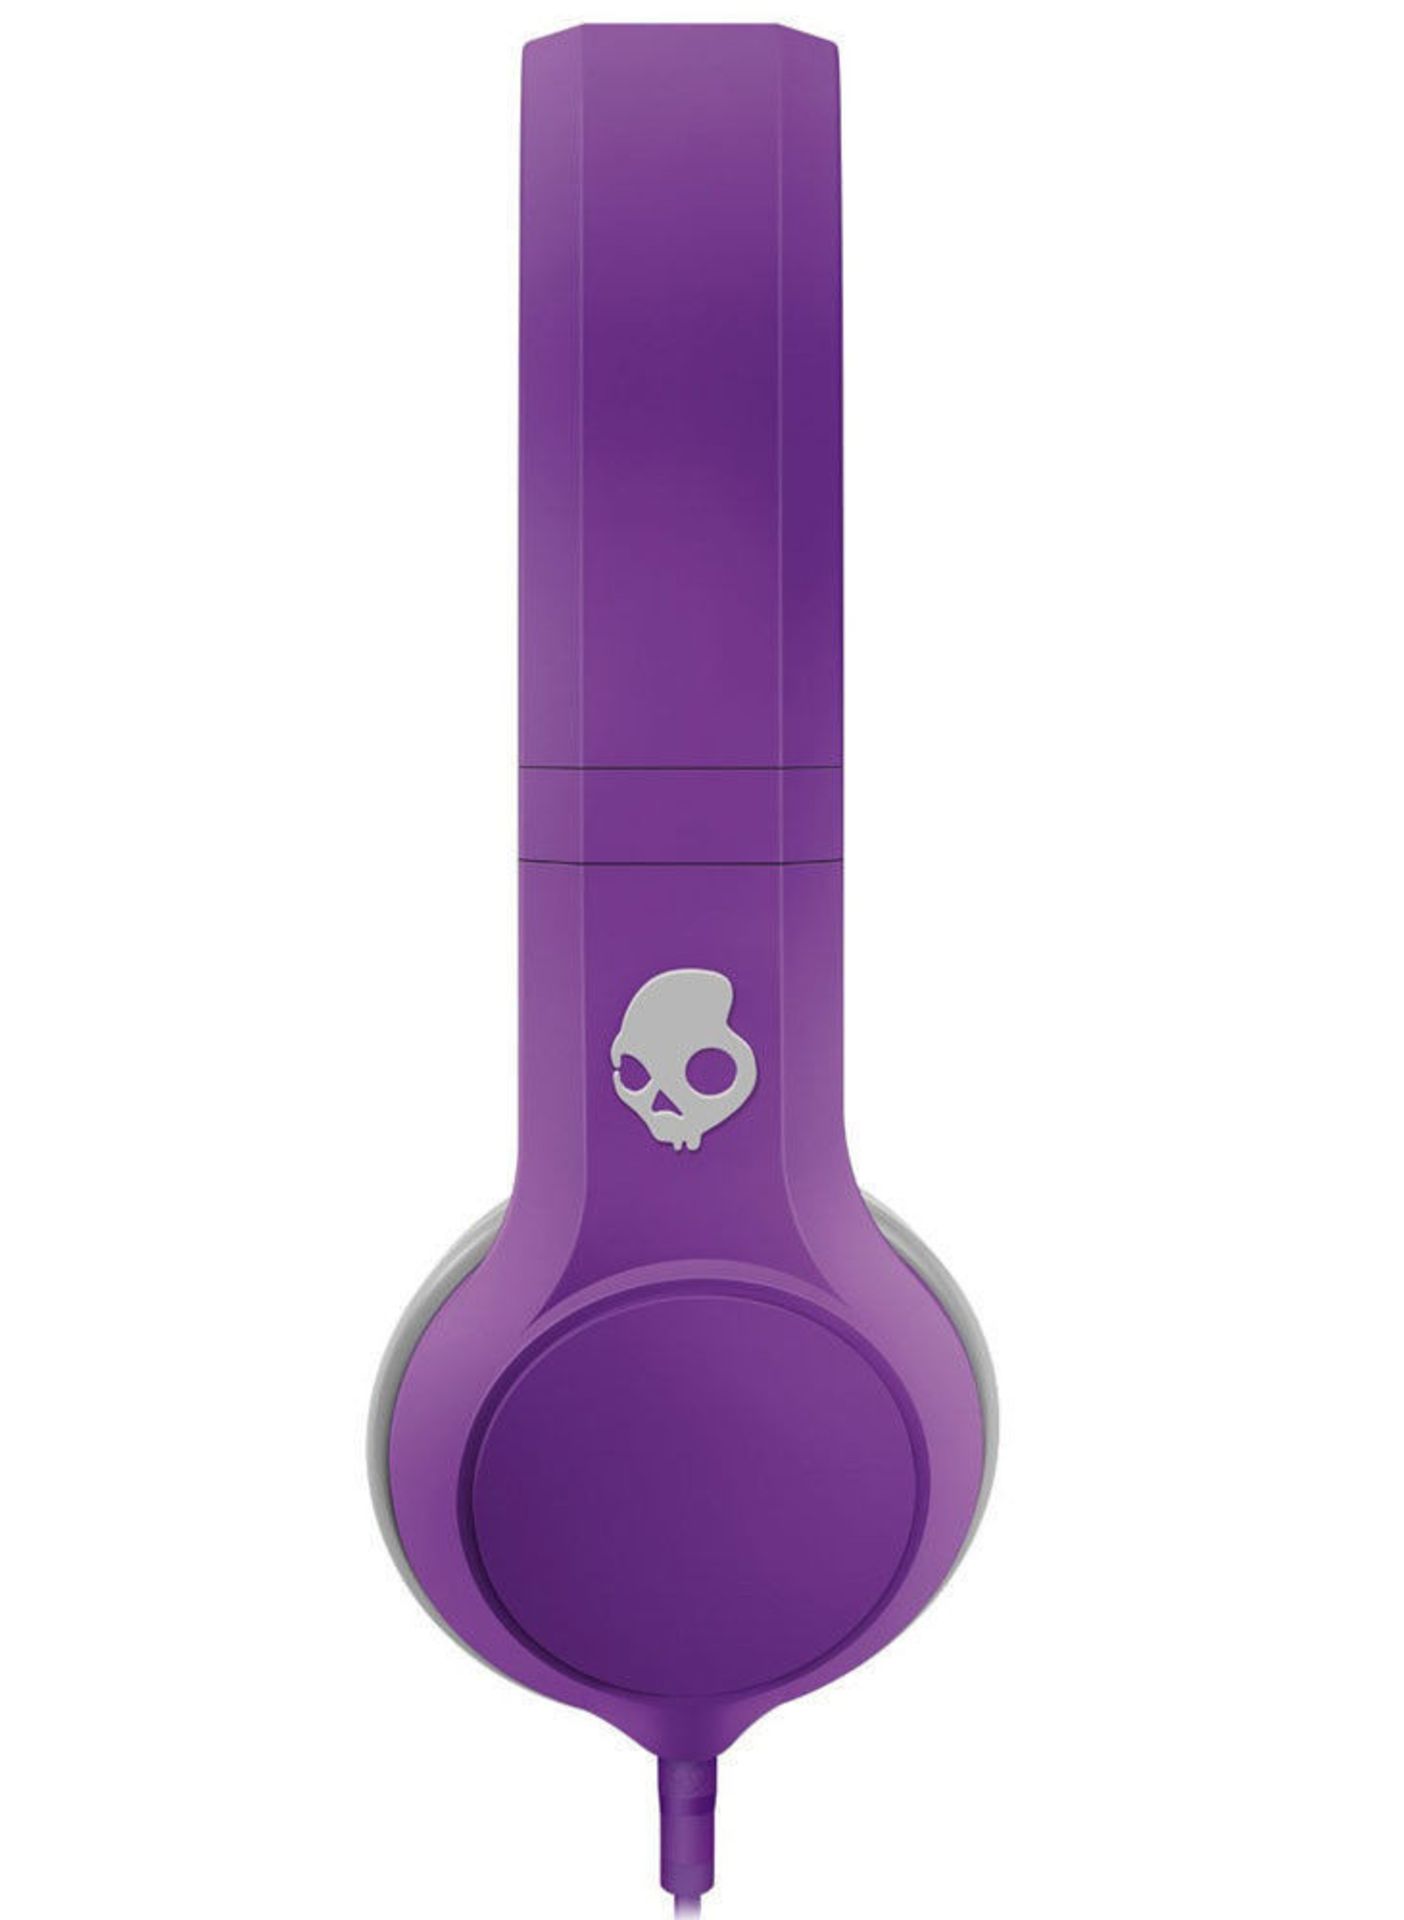 V Brand New Skullcandy Cassette Headphones - With Mic and Remote - Interchangeable Ear Pillows - - Image 2 of 2